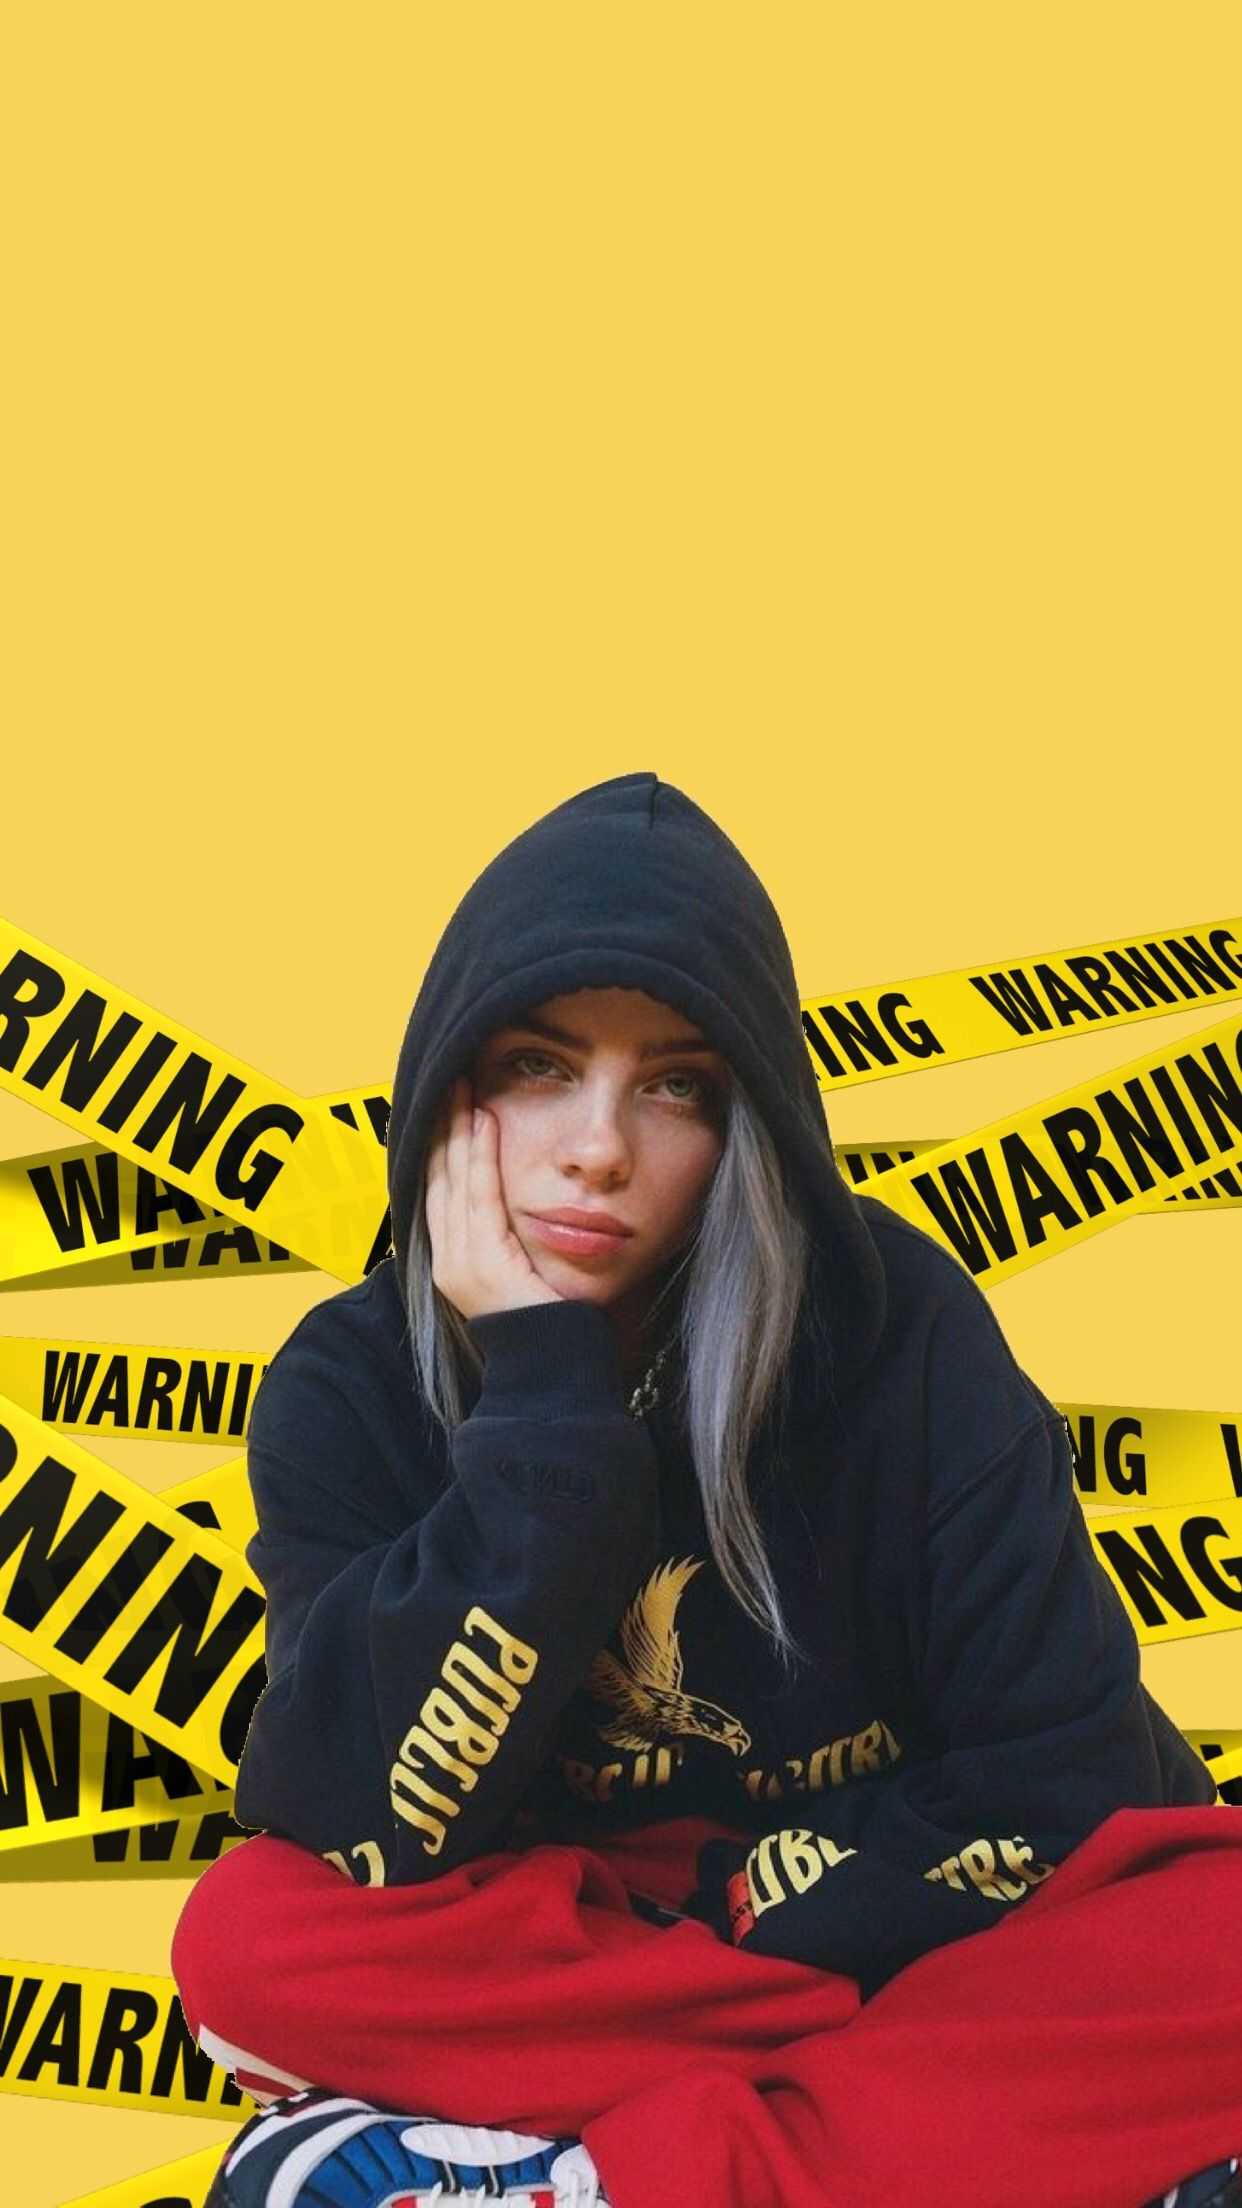 Billie Eilish wallpaper for iPhone and Android phone. - Billie Eilish